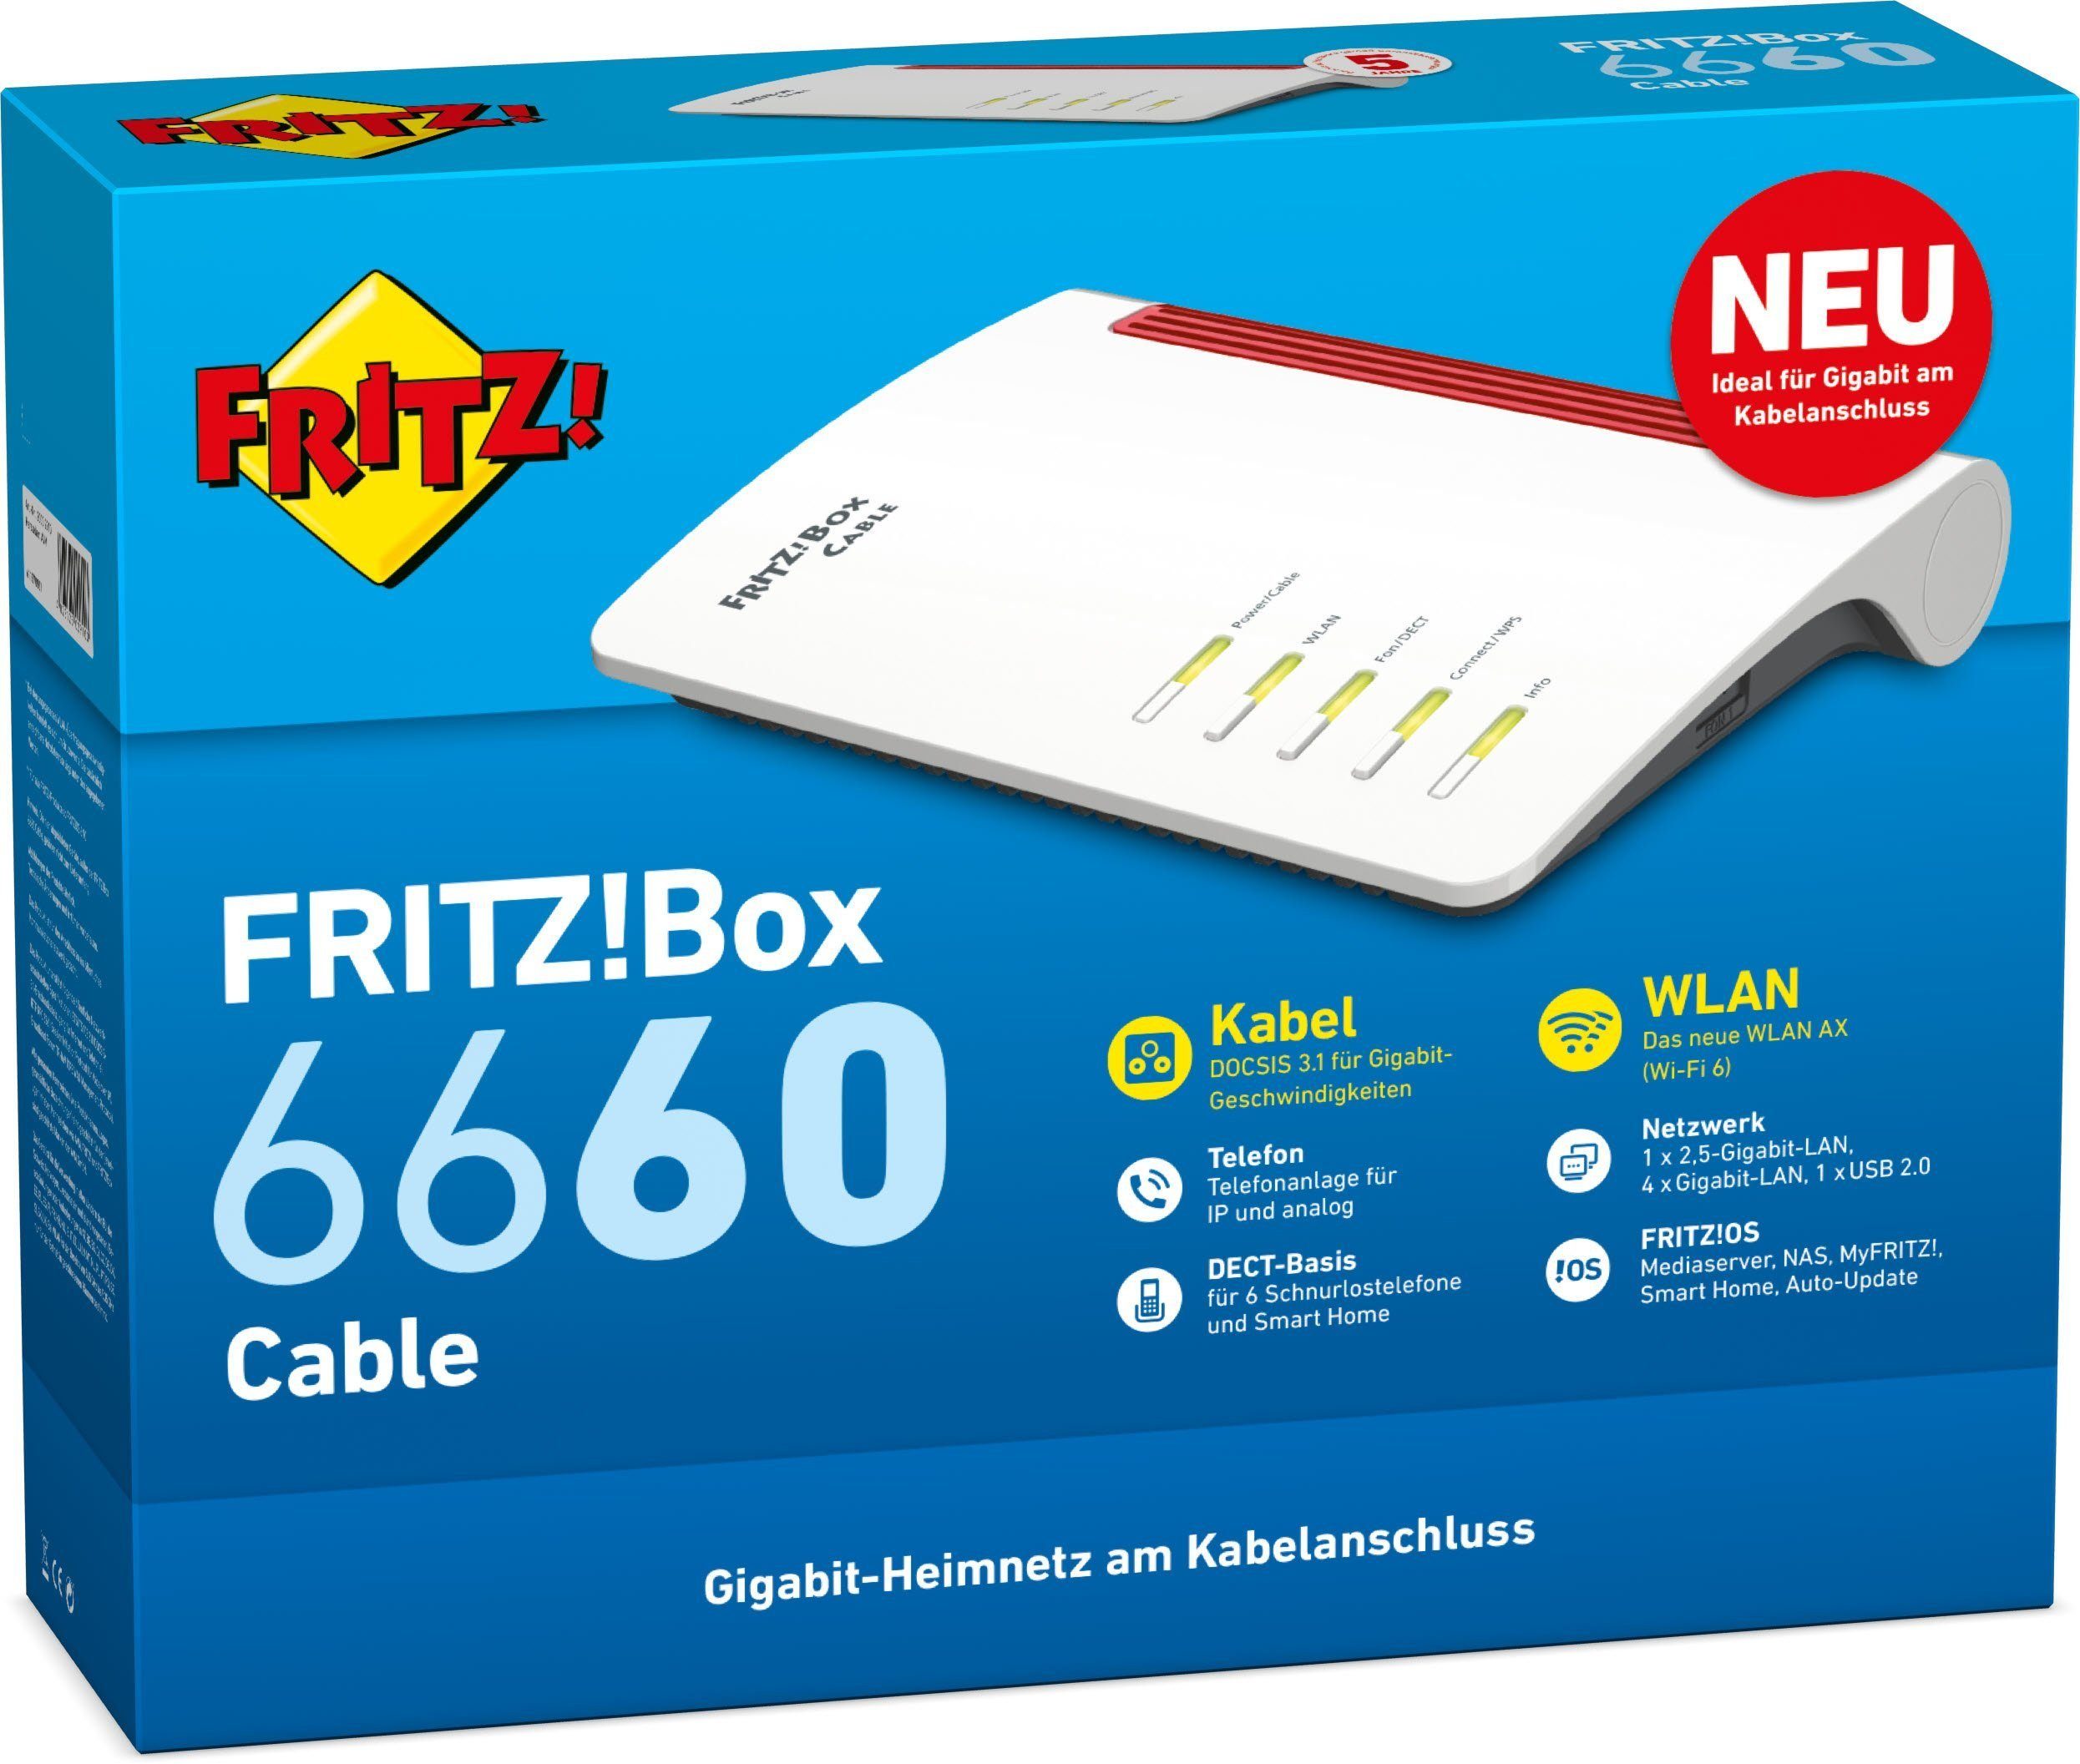 FRITZ!Box AVM Cable WLAN-Router 6660